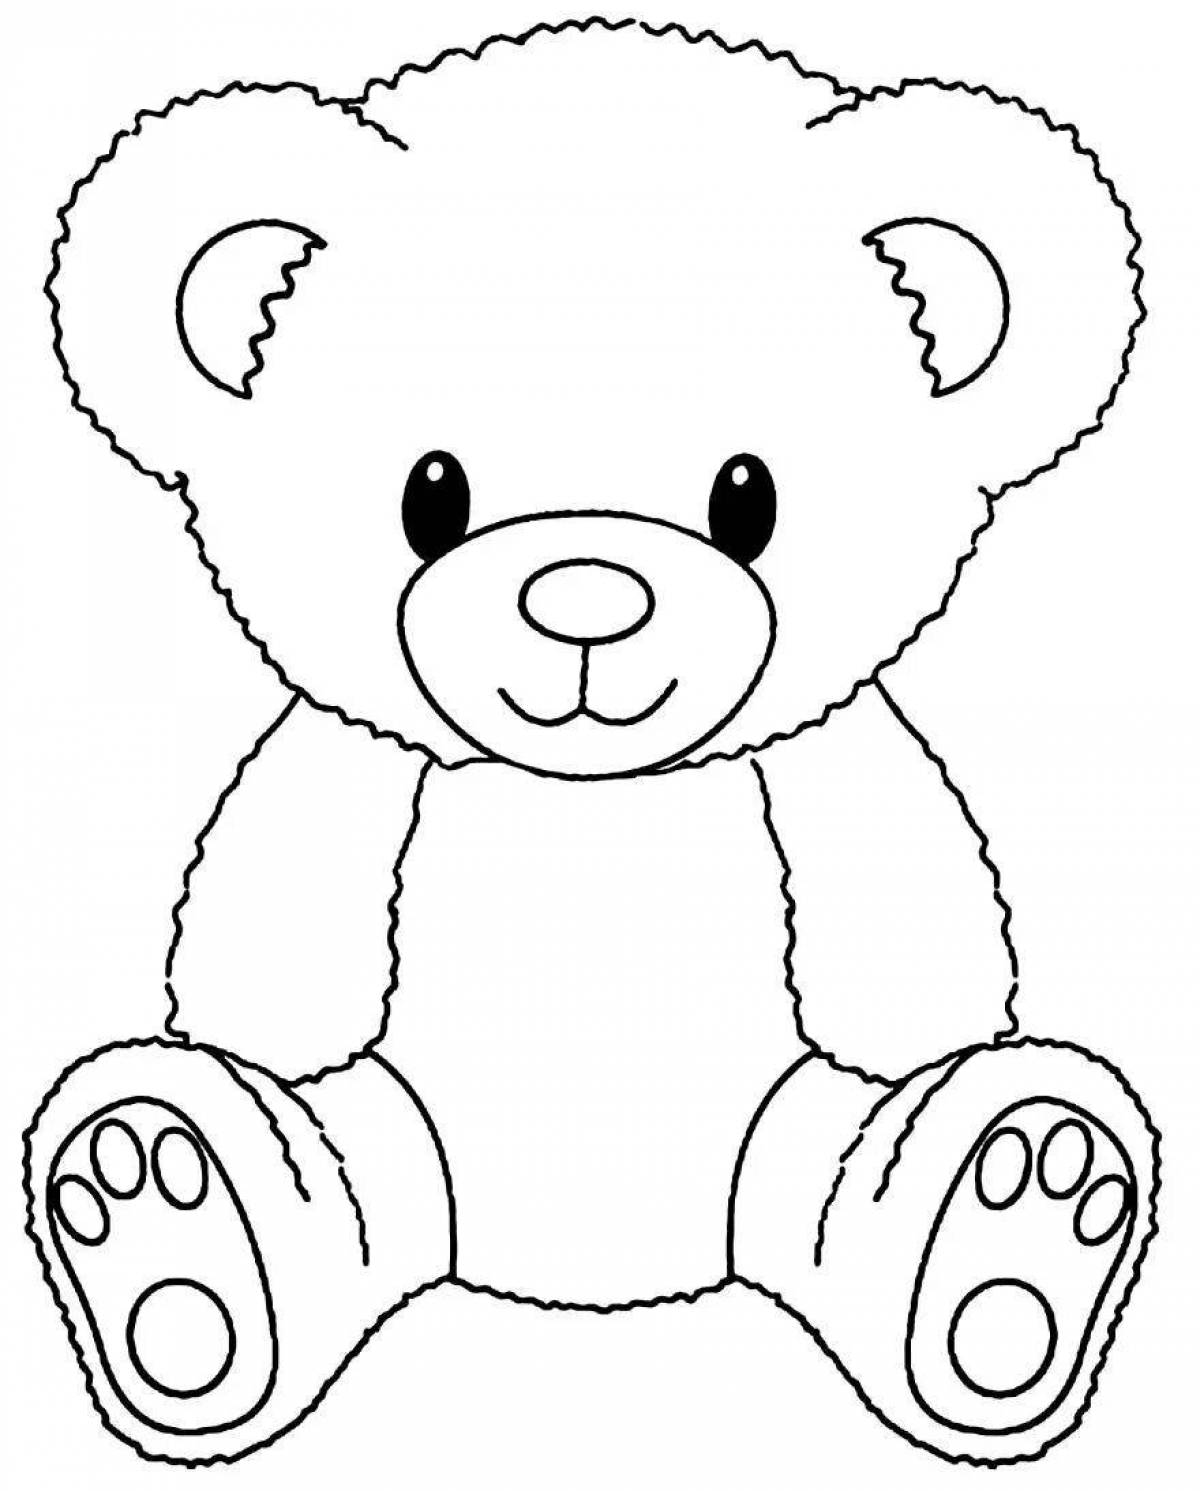 Silly teddy bear coloring page